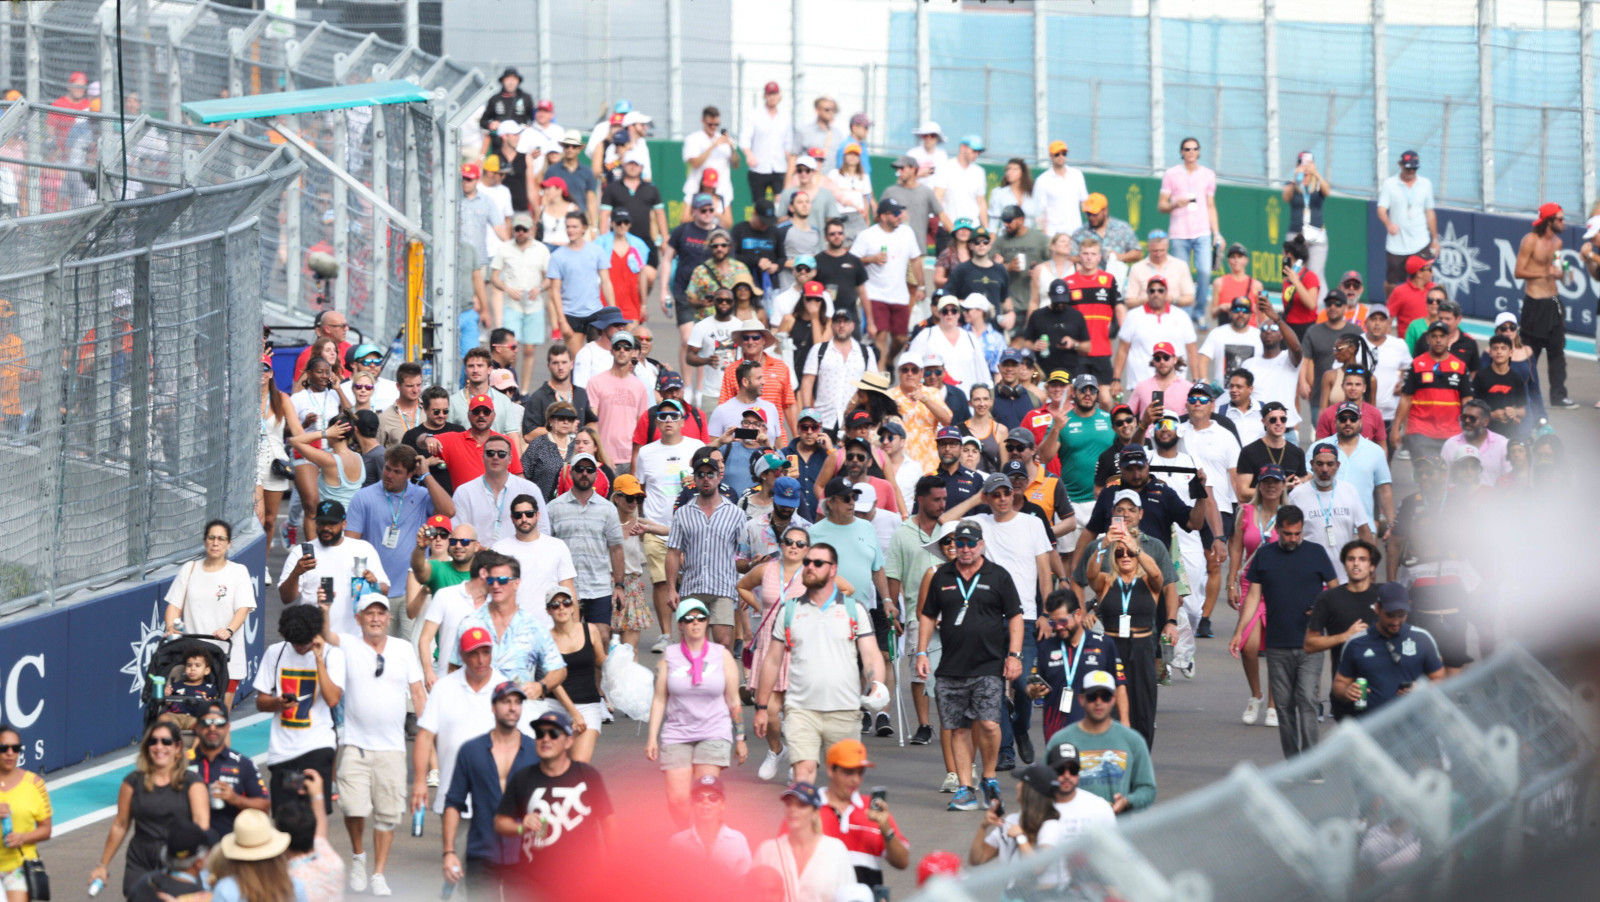 Spectators arriving for the race. Miami May 2022